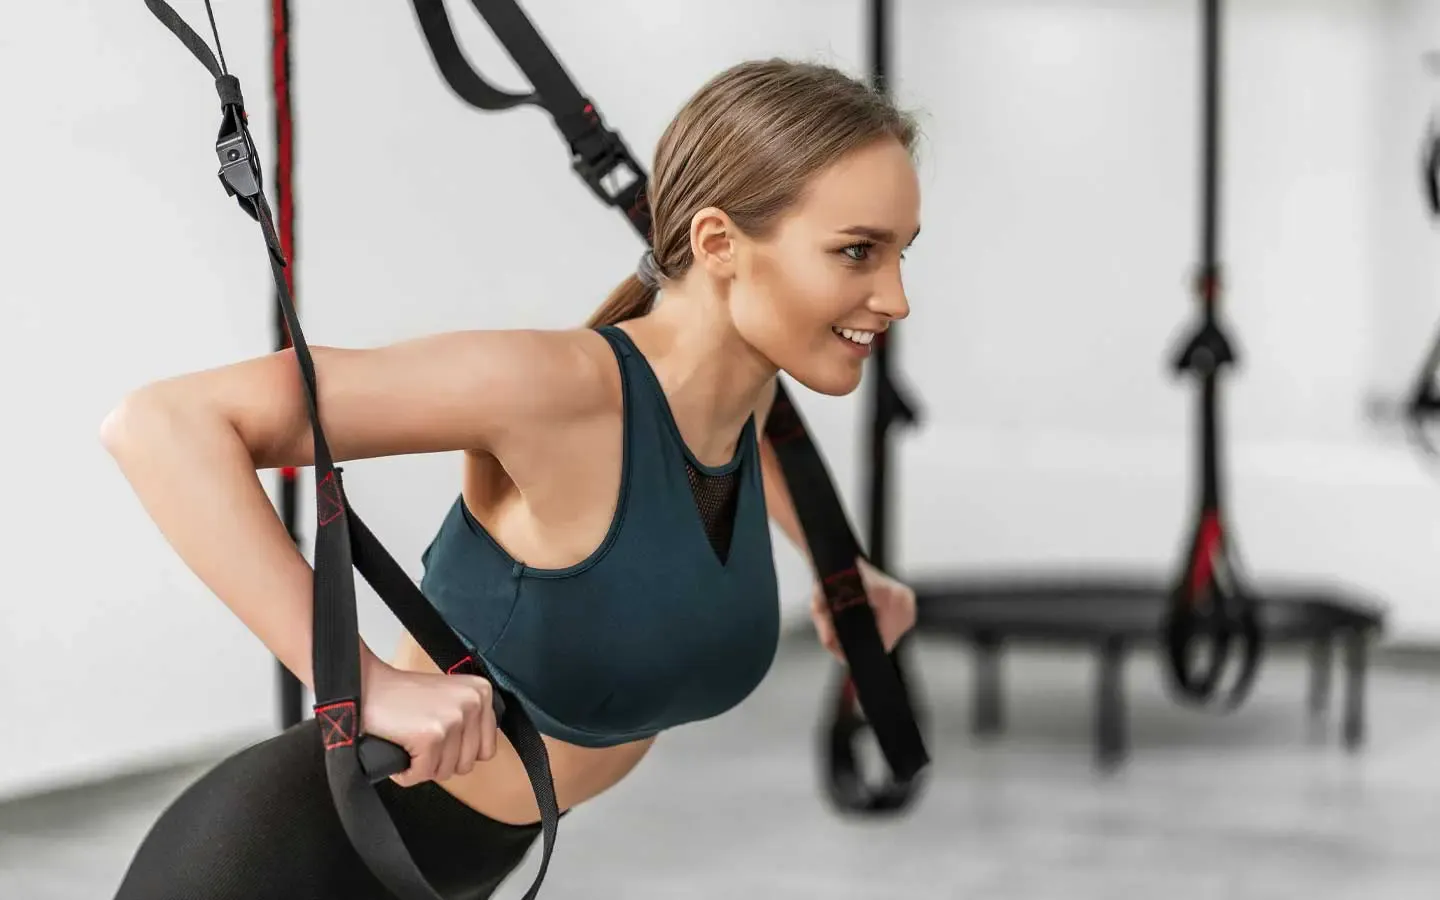 Can Taking an Advanced Fitness Course Help Your Career